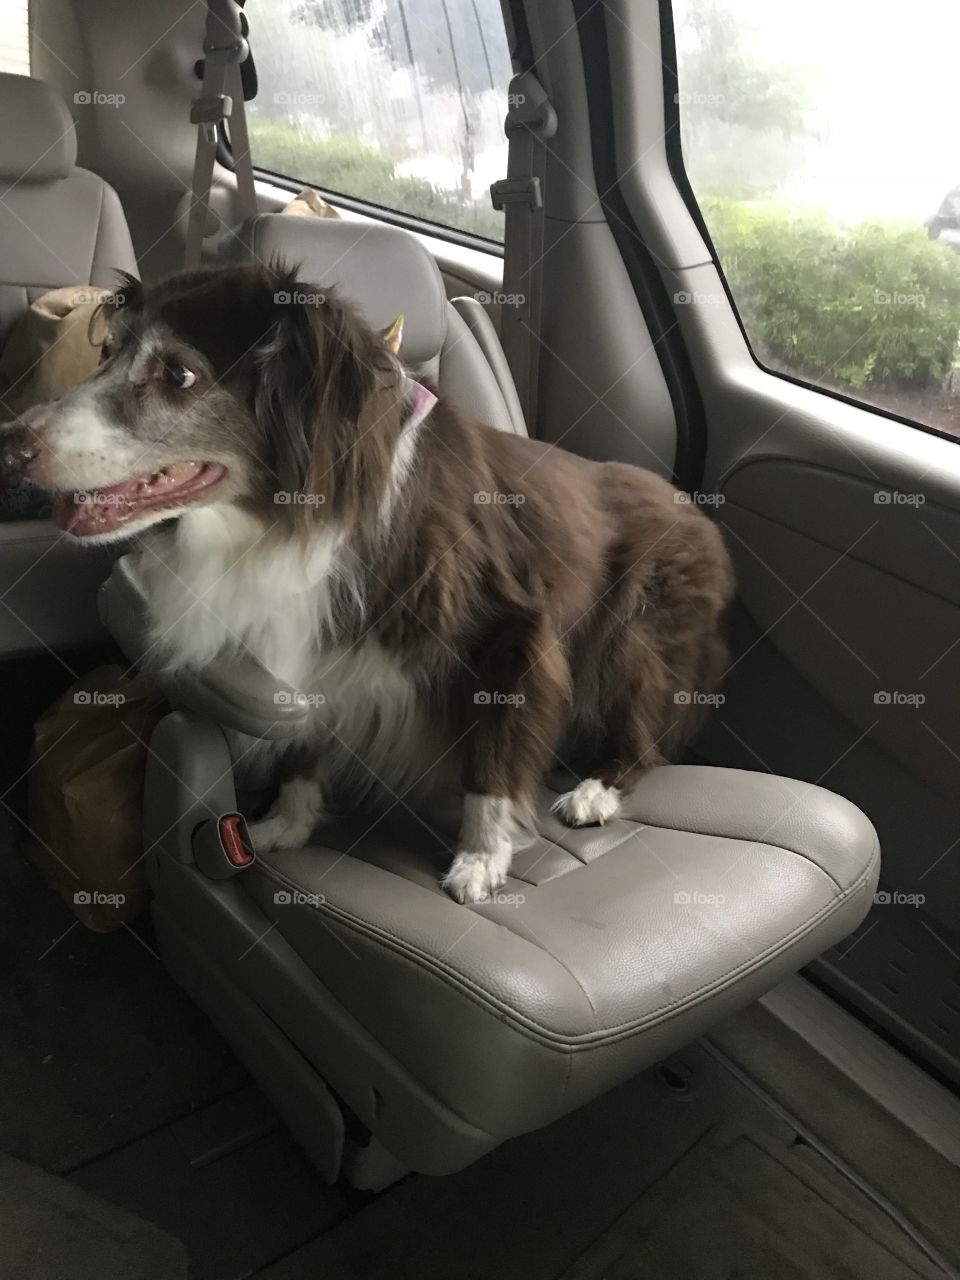 Crouching on the car seat